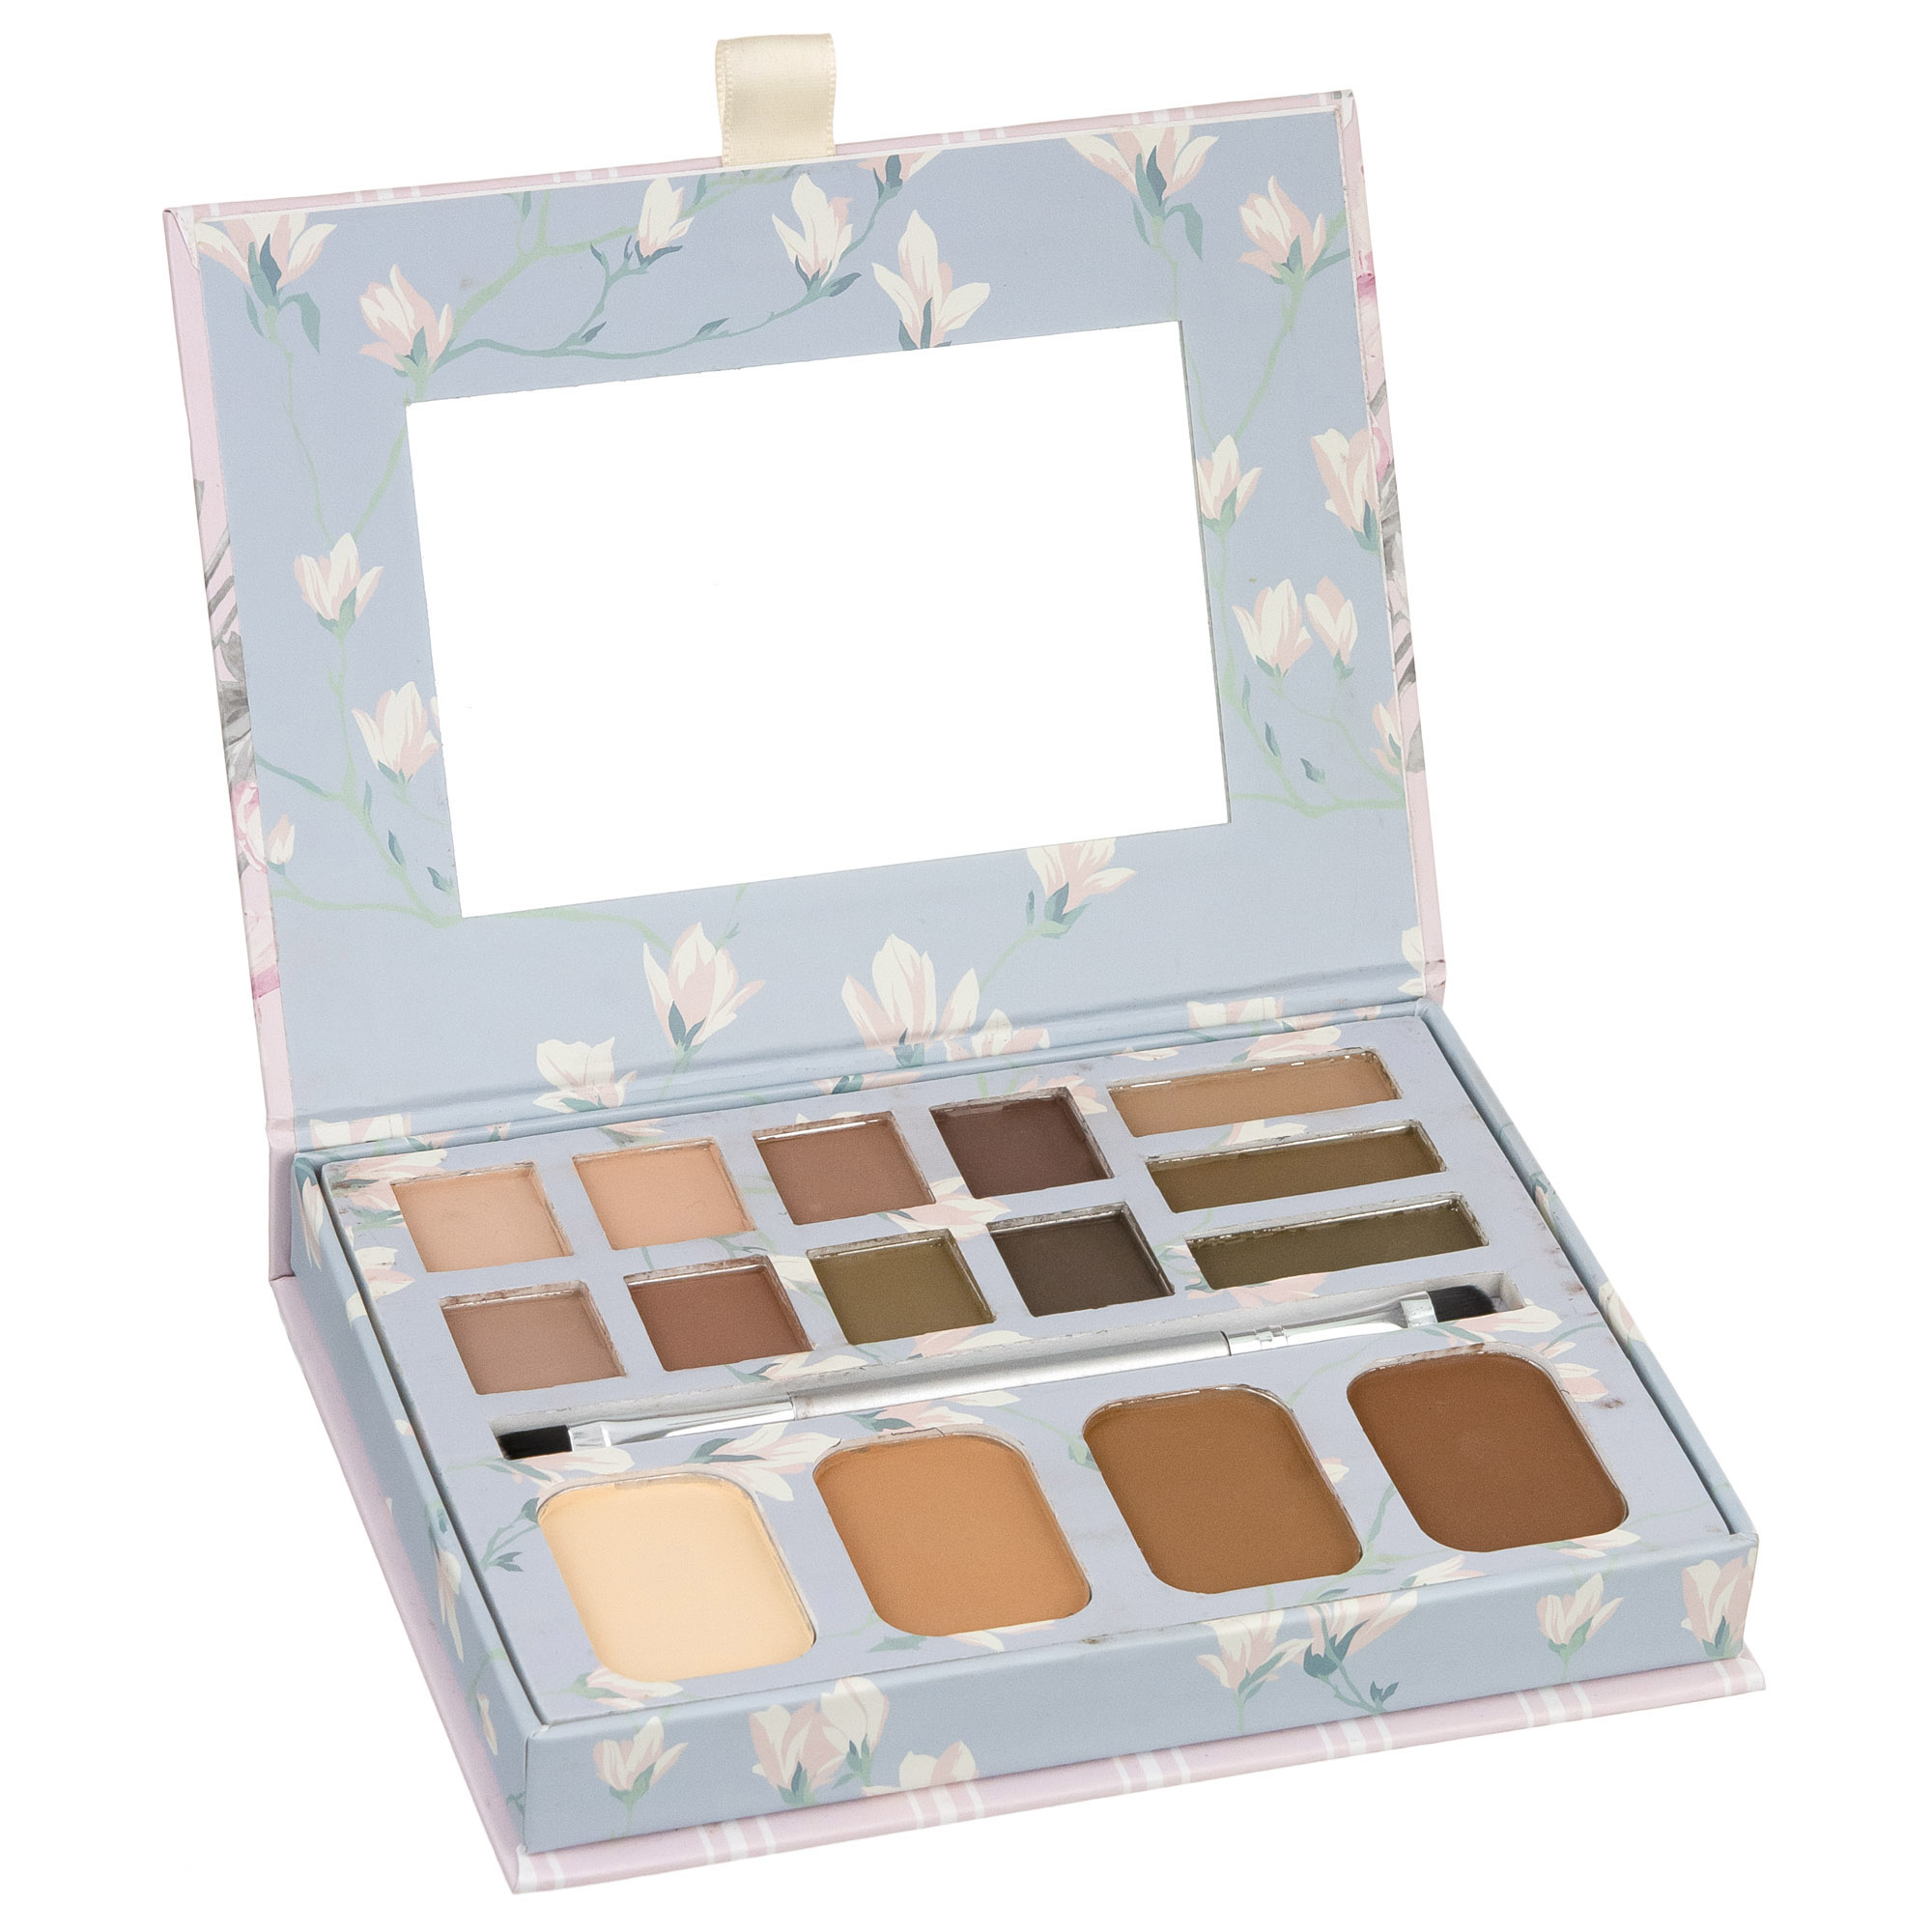 Laura Ashley Total Face Contour Palette Set w/ Neutral Face Shades & Dual-Ended Application Brush